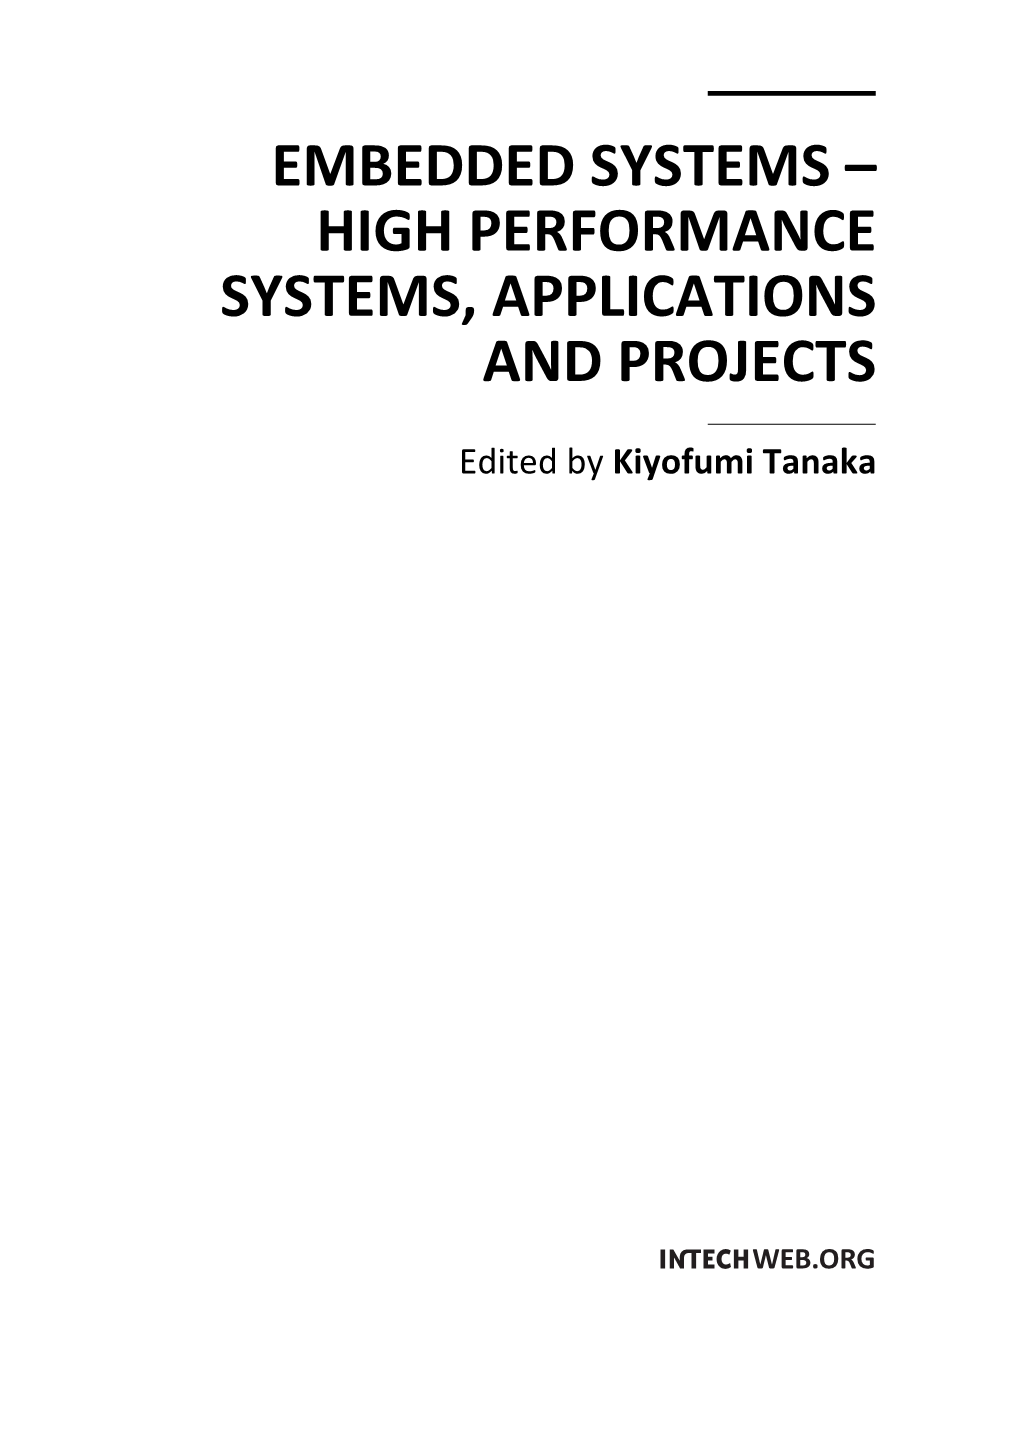 High Performance Systems, Applications and Projects